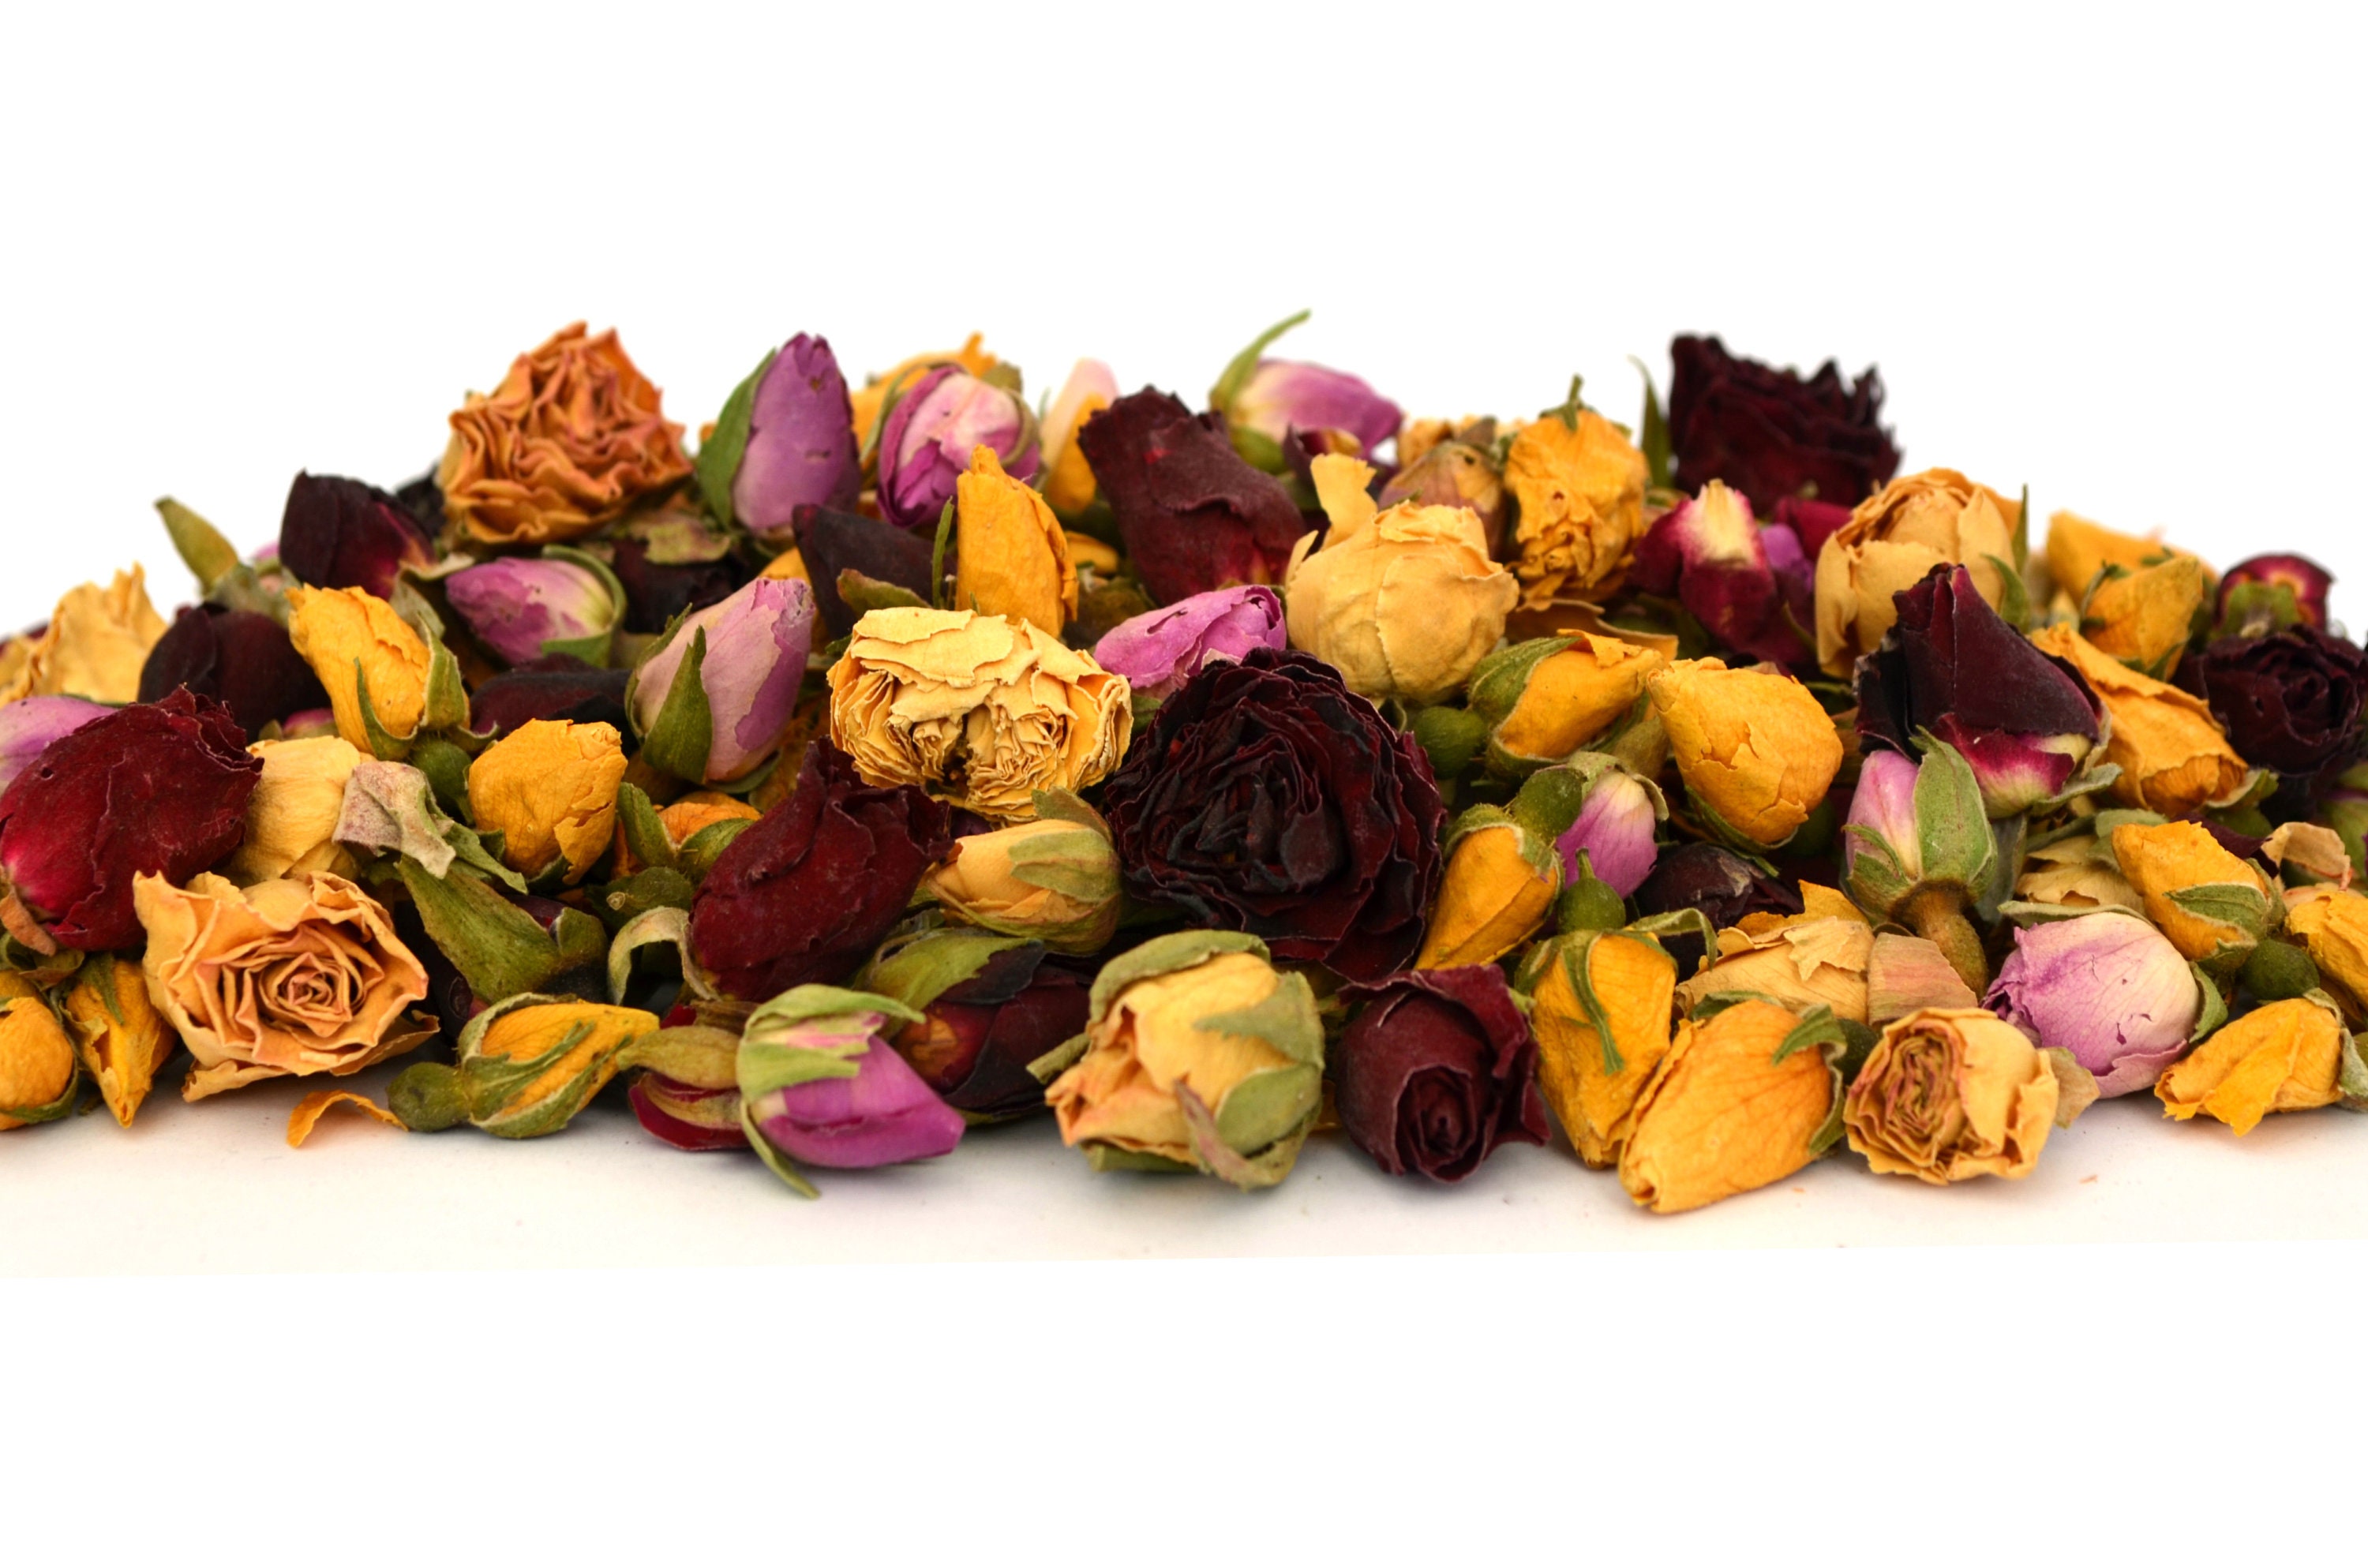 Rose Flowers Soap Candle Cake Decor Dried Rose Buds Edible Rose Petals Craft 